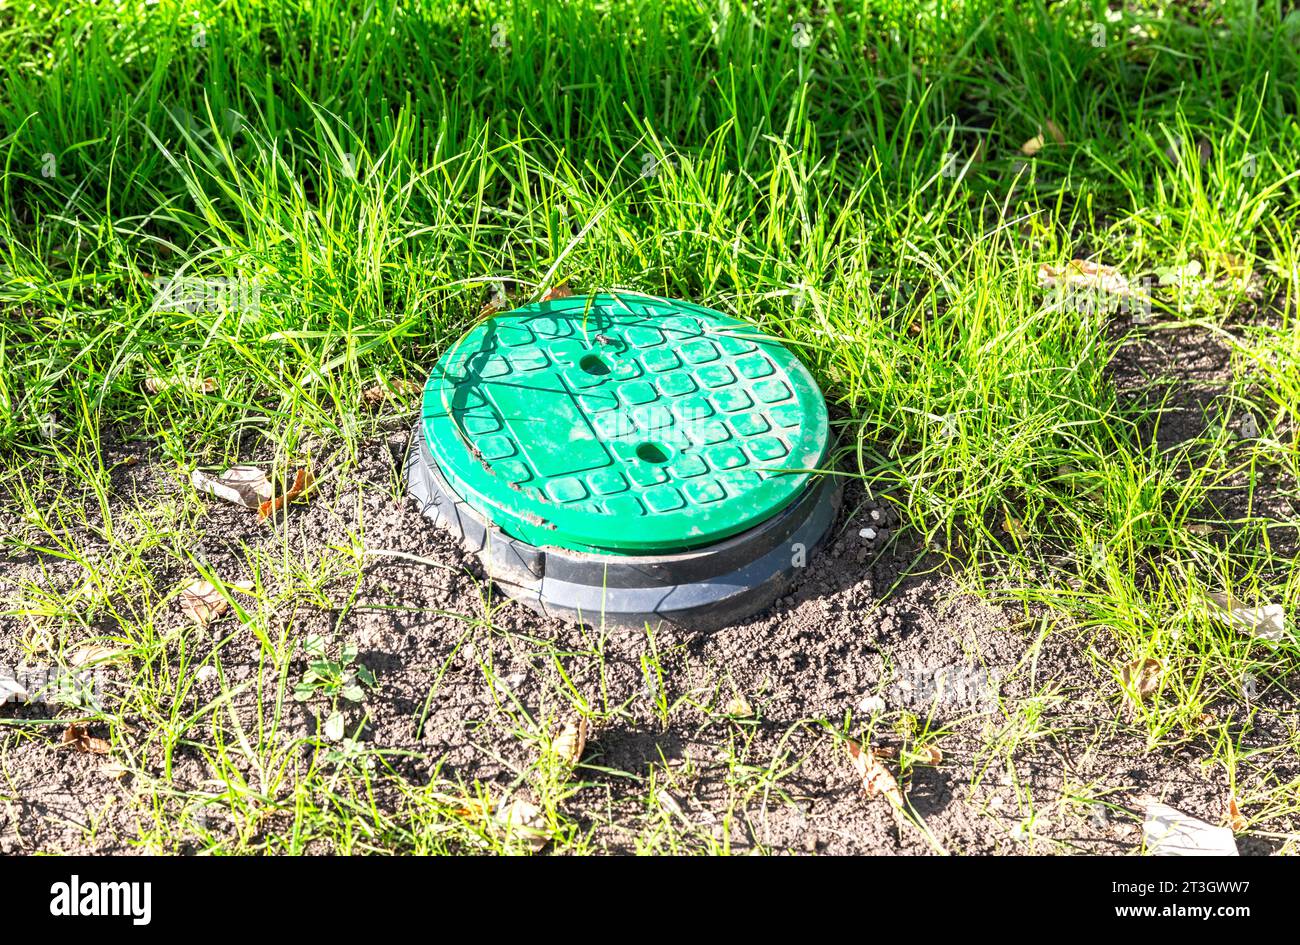 Covered manhole with green plastic cover on the lawn. Irrigation system, technique of watering in the garden Stock Photo